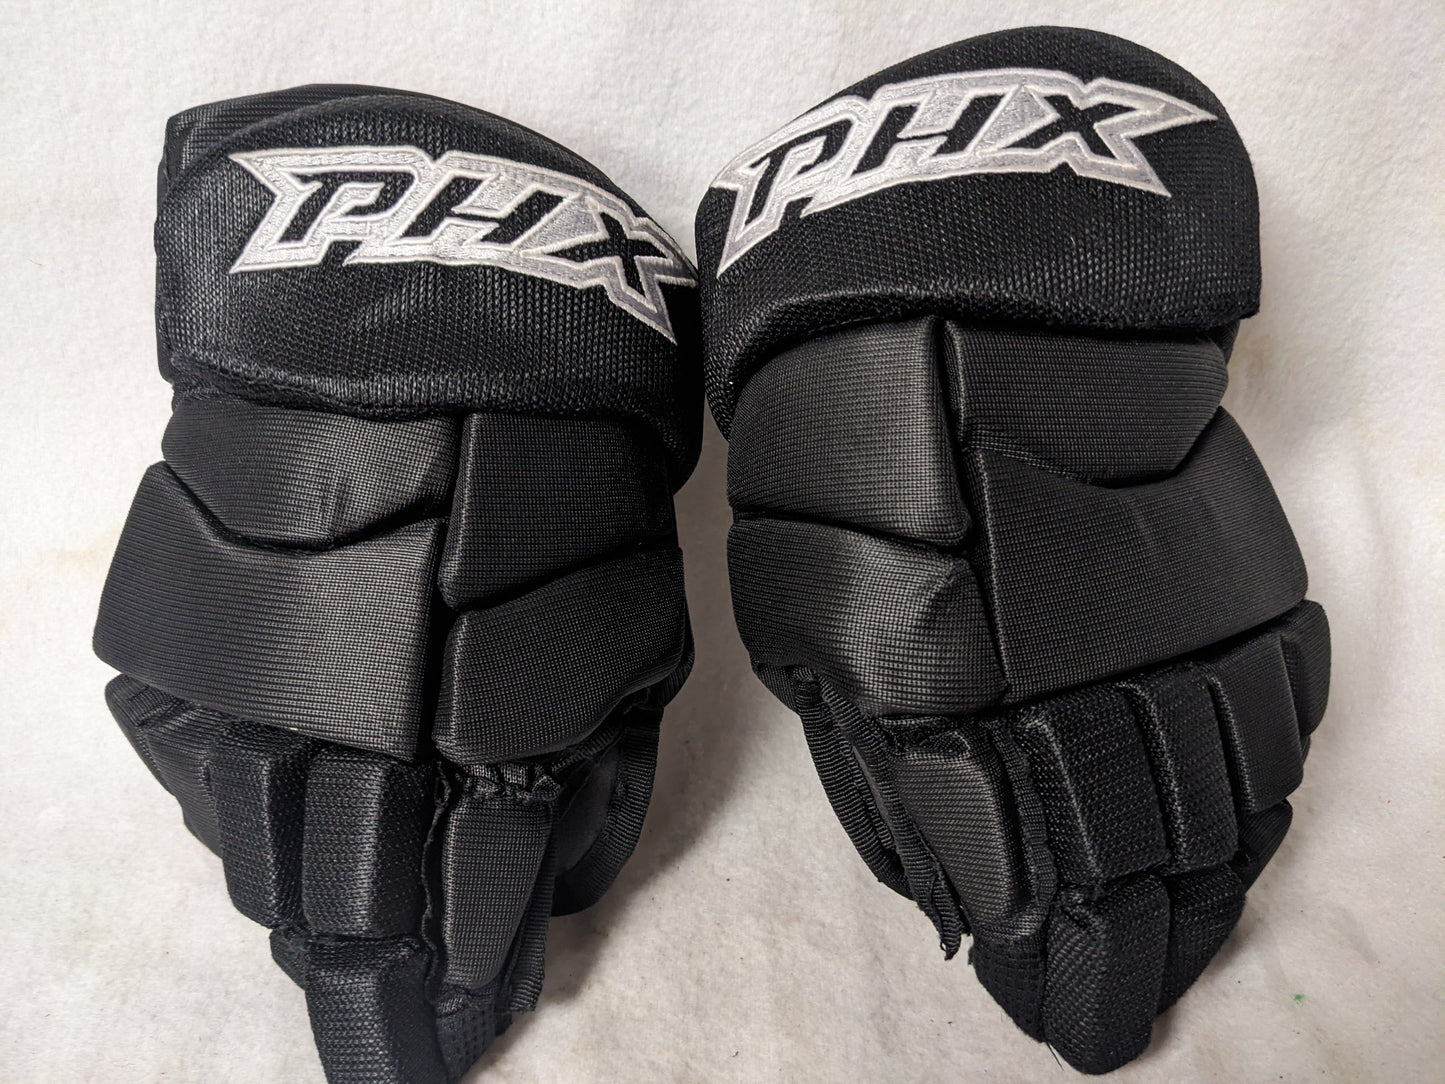 PHX Elite Youth Hockey Gloves Size 10 In Color Black Condition Used